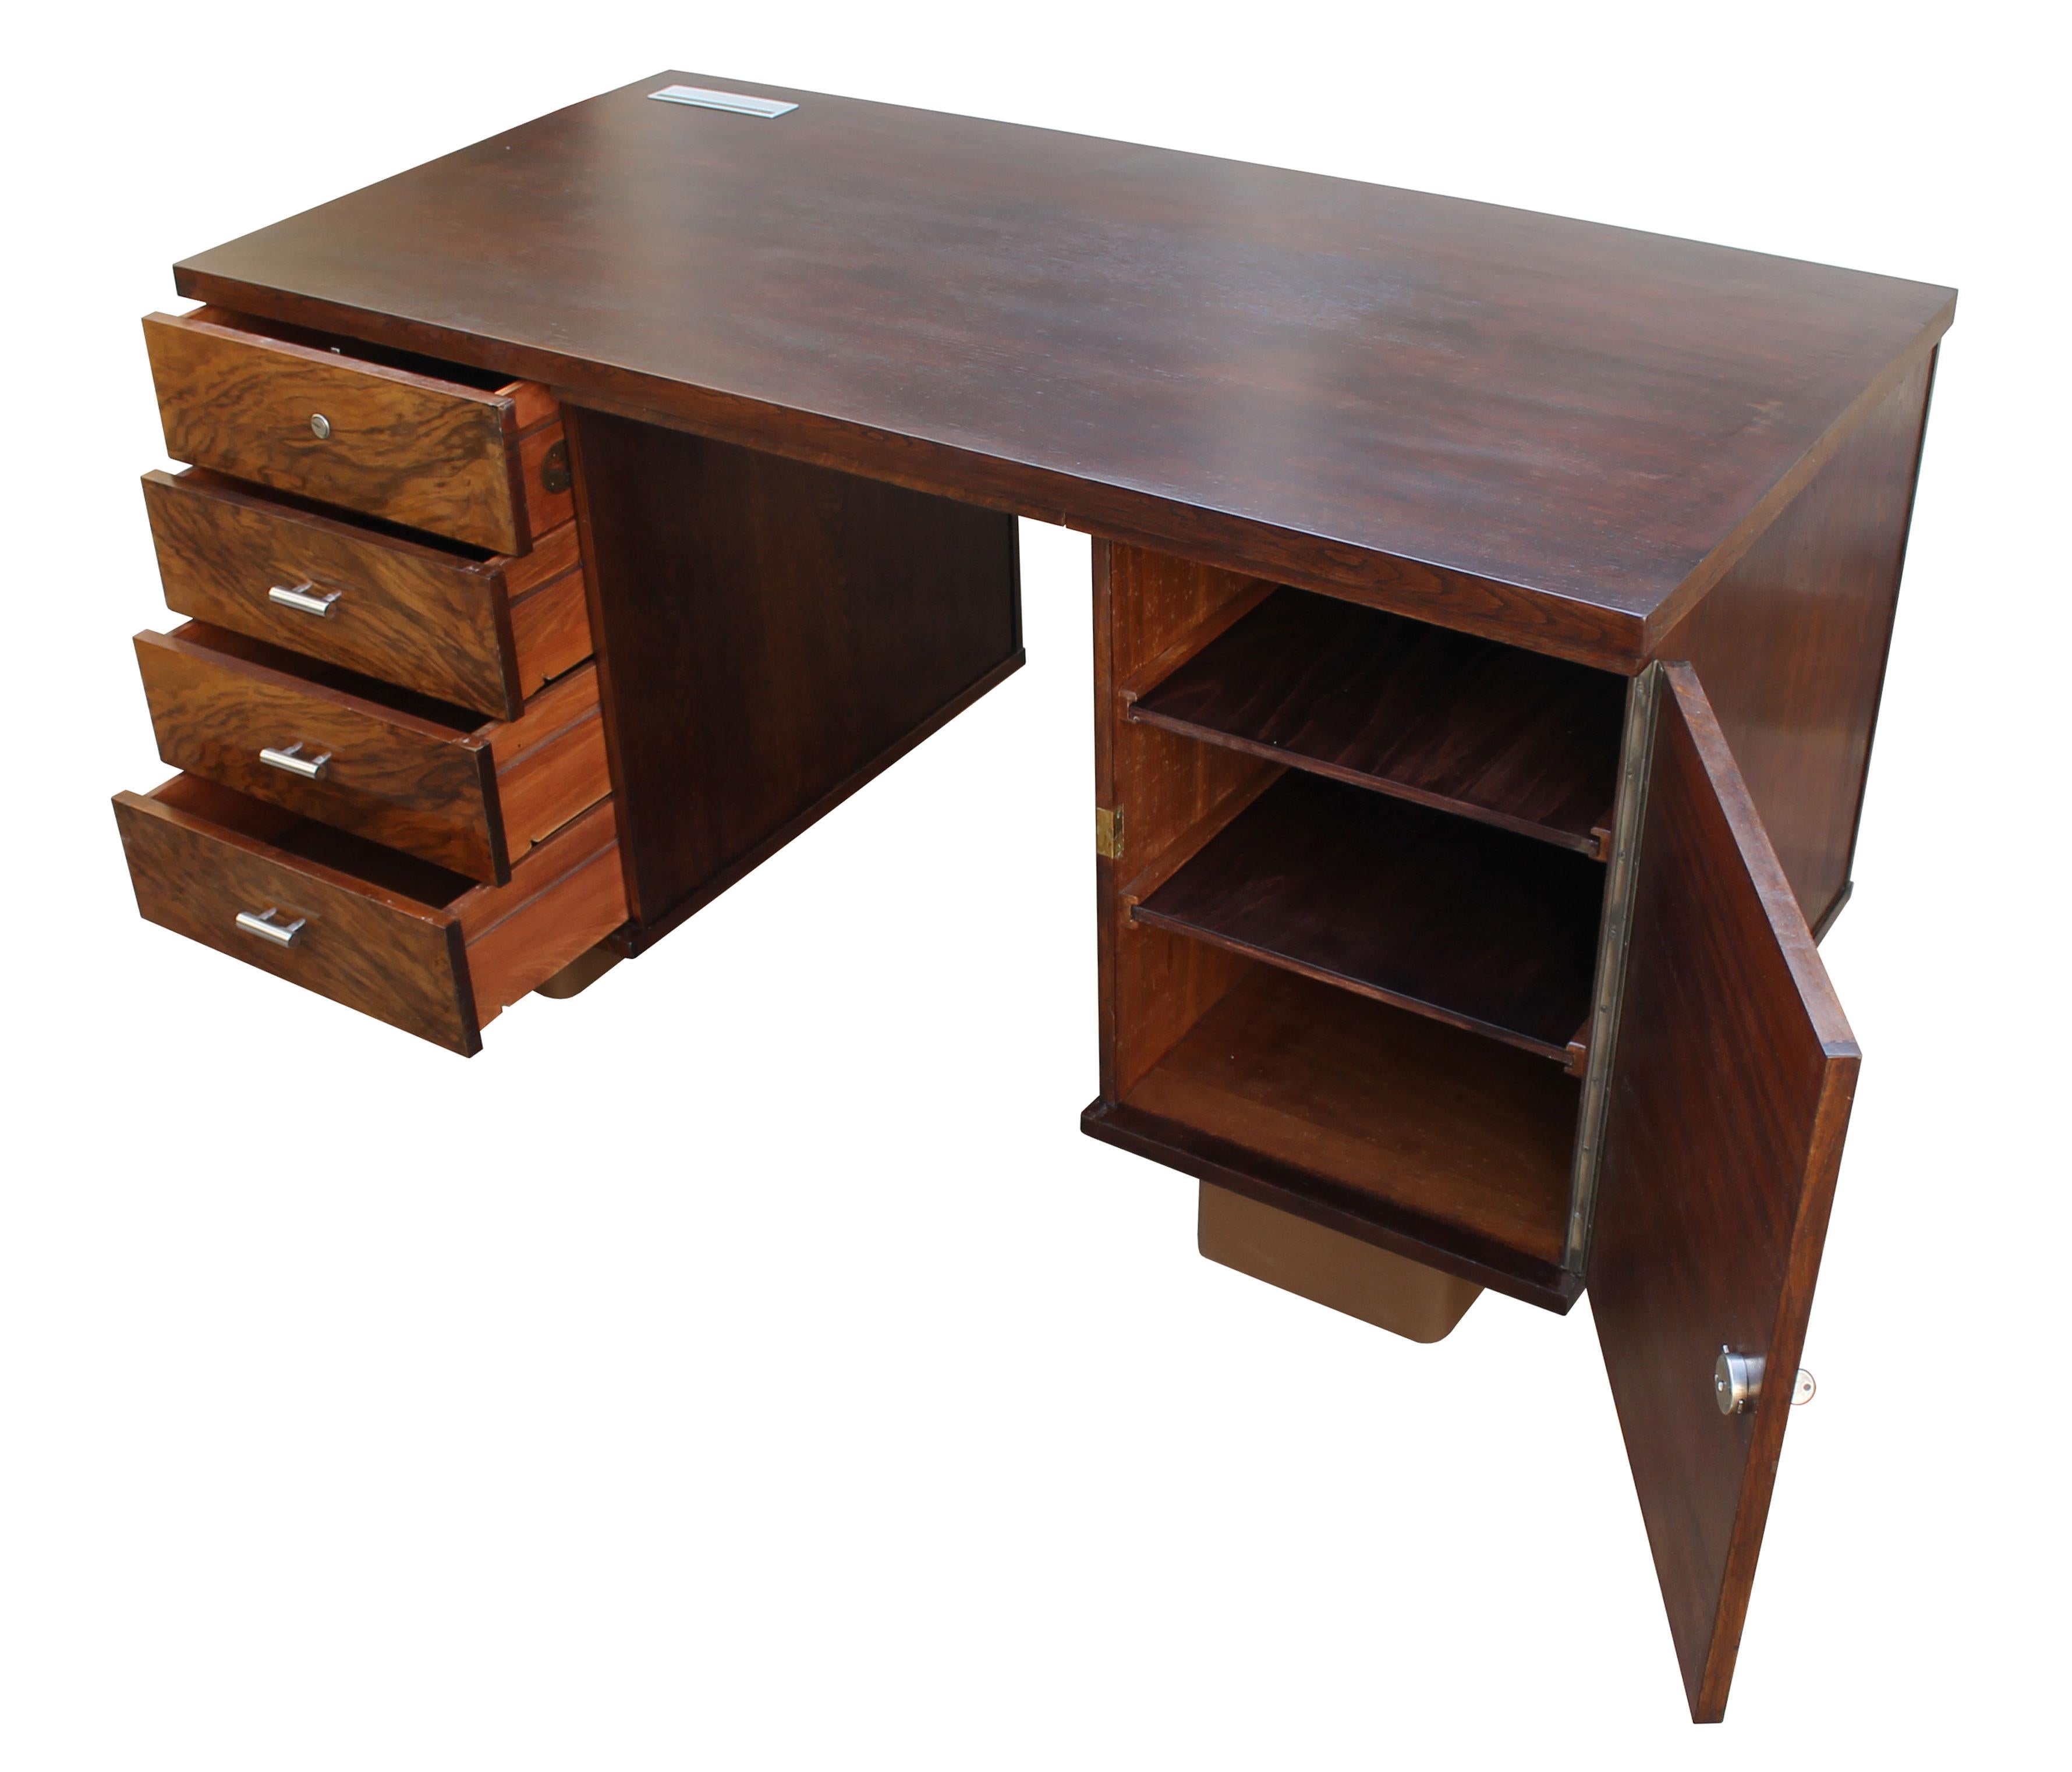 Mid-20th Century 1930's Modernist Desk by Jindrich Halabala for UP Brno For Sale